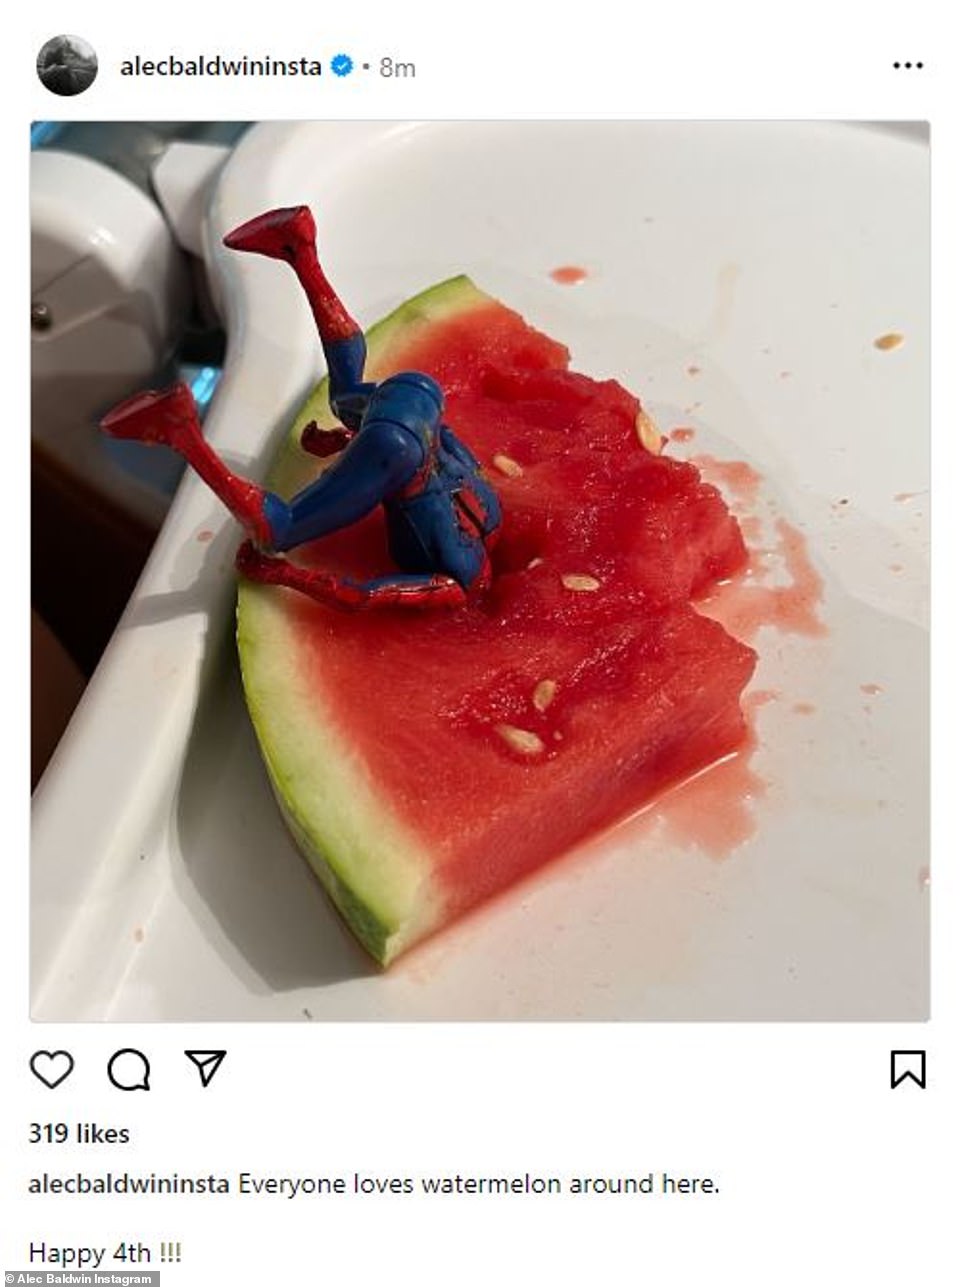 A funny guy: Alec Baldwin shared a photo of watermelon as he wished all a 'happy 4th'